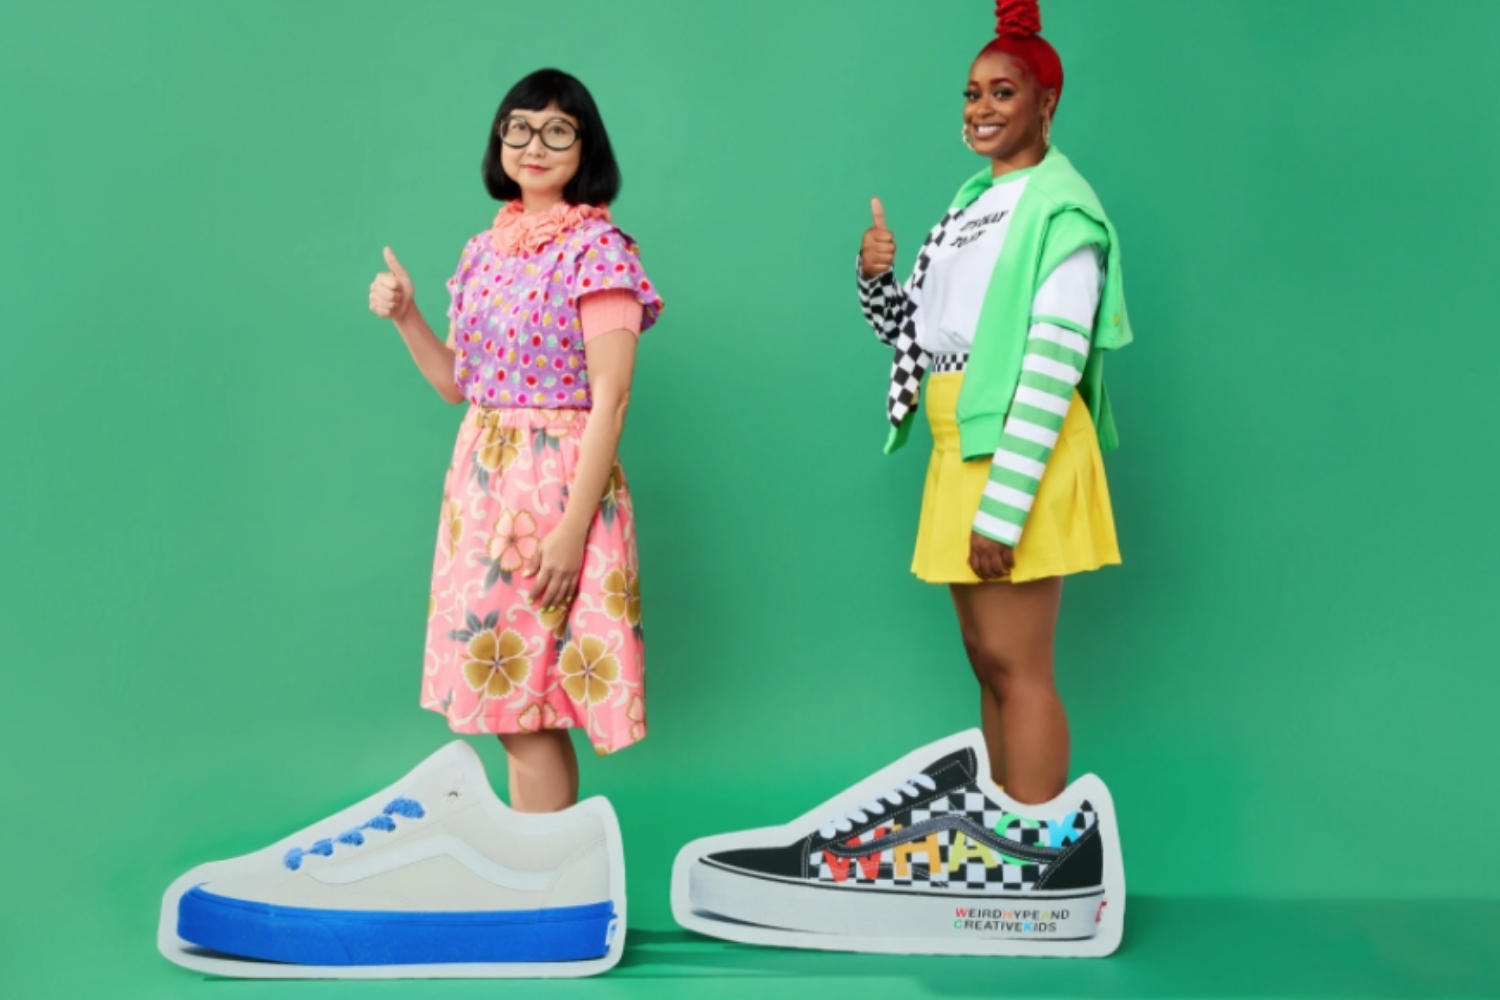 Check out the Tierra Whack x Vans Collection here